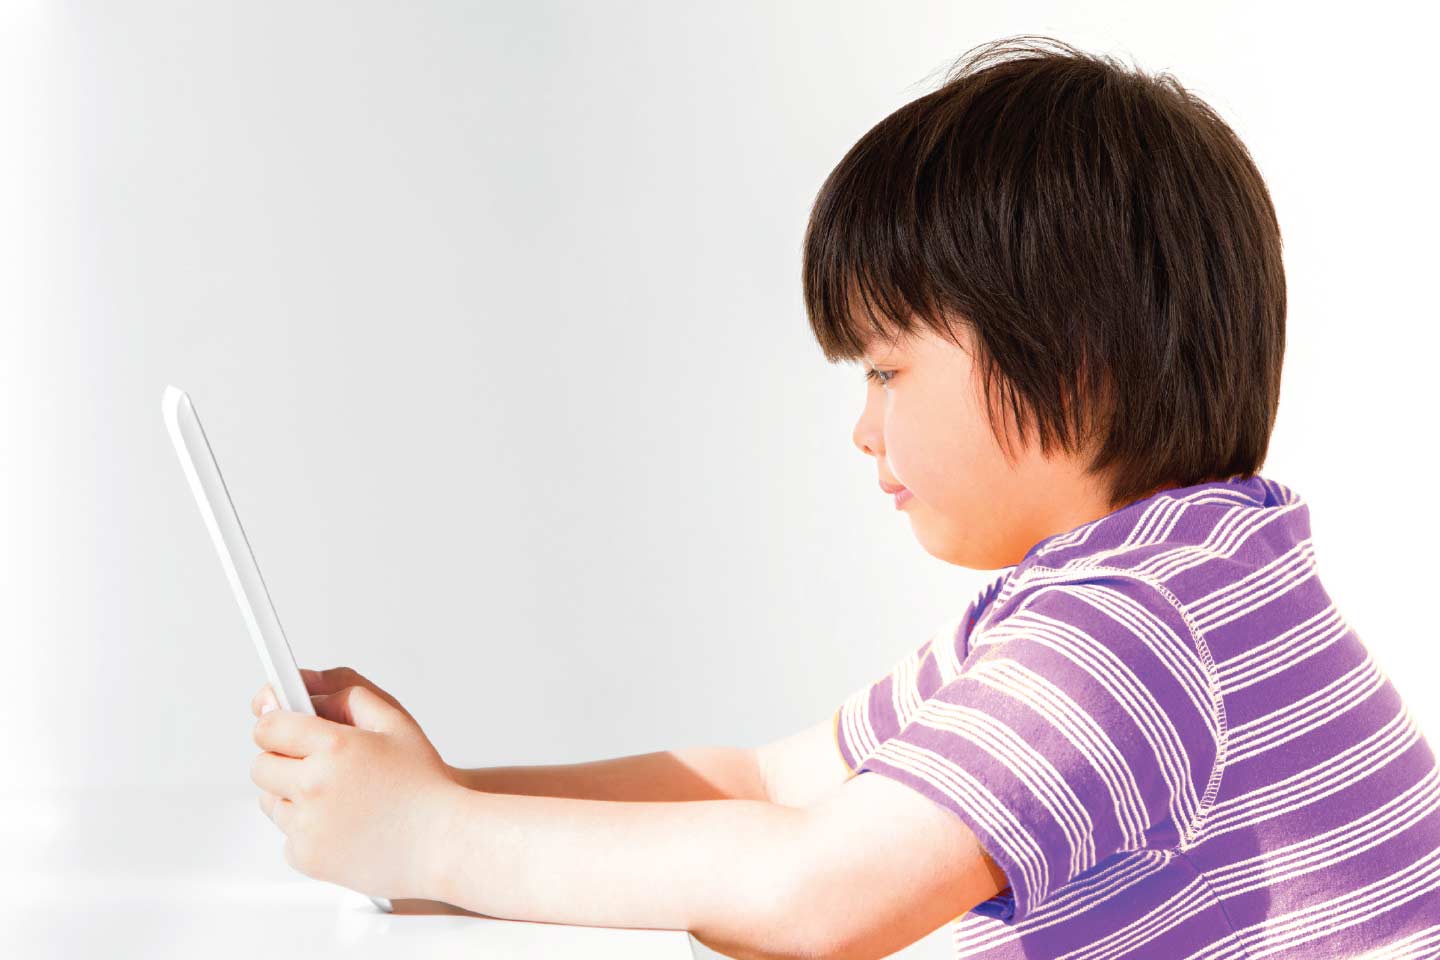 Male child playing on tablet device